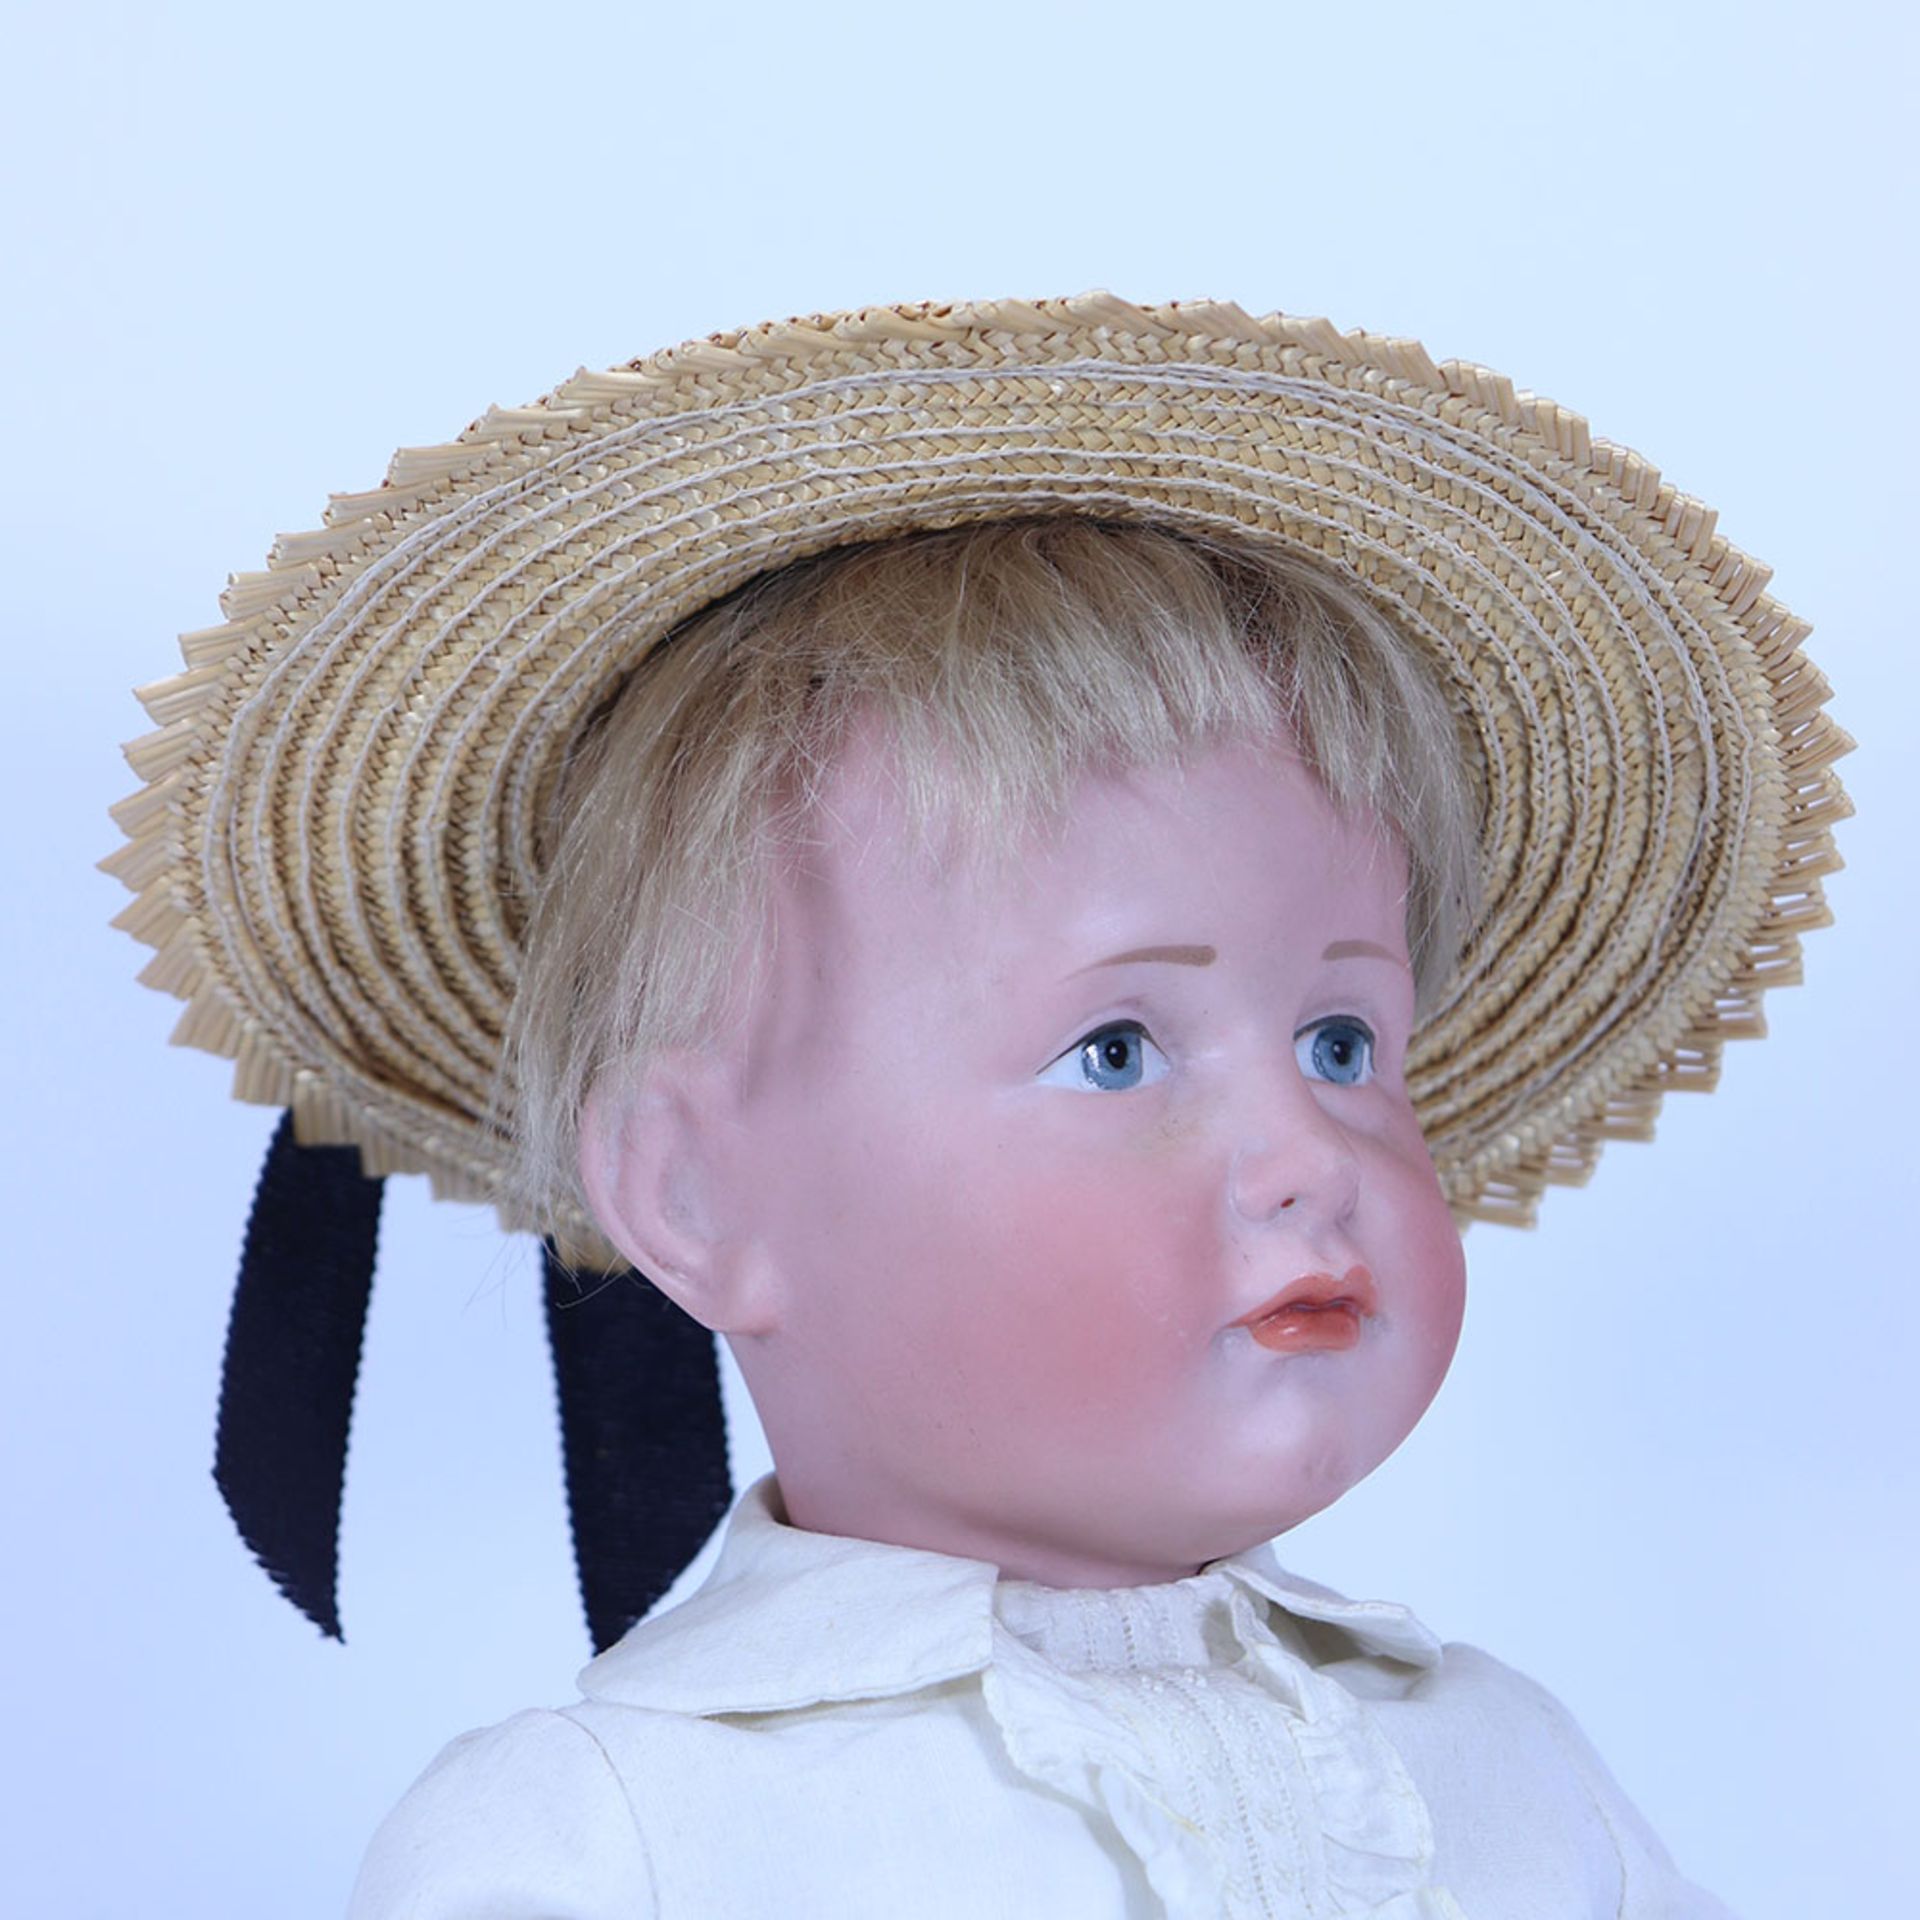 A Kammer & Reinhardt 114 bisque head character doll, German circa 1910, - Image 2 of 3